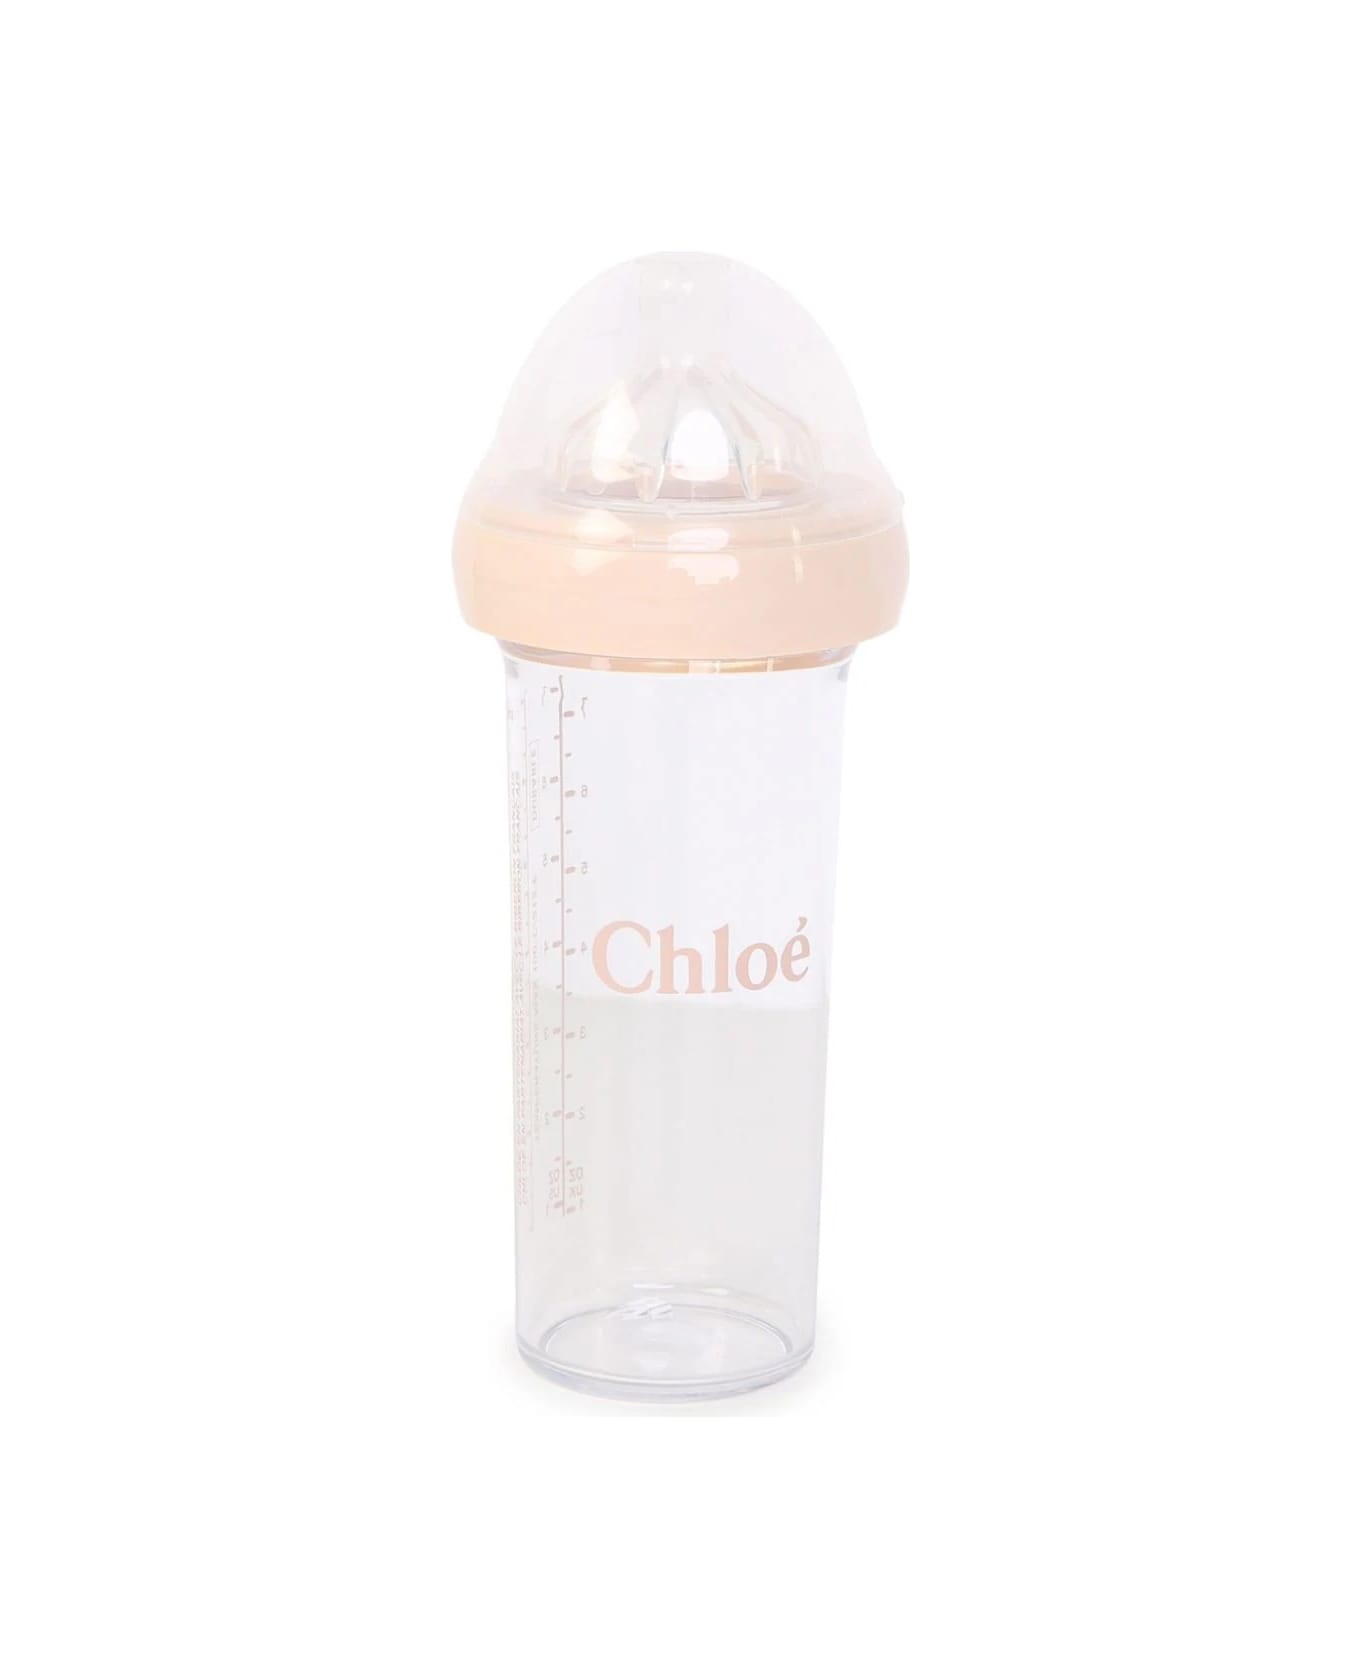 Chloé 210 Ml Baby Bottle In Light Pink With Logo - Pink アクセサリー＆ギフト